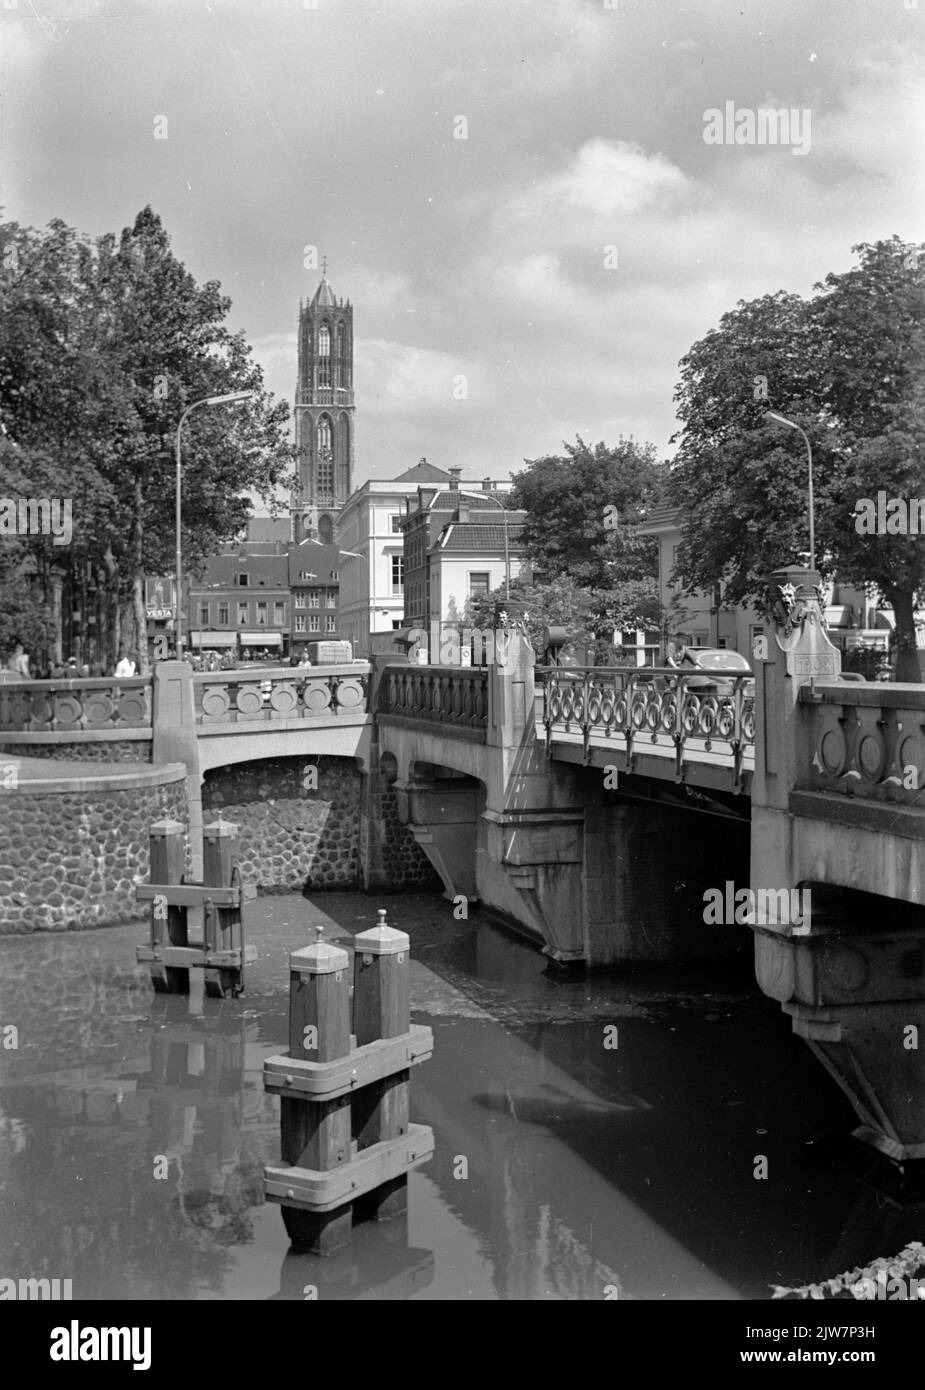 View of the Willems Bridge over the Stadsbuitengracht in Utrecht, with the Mariaplaats and the Dom Tower in the background. Stock Photo